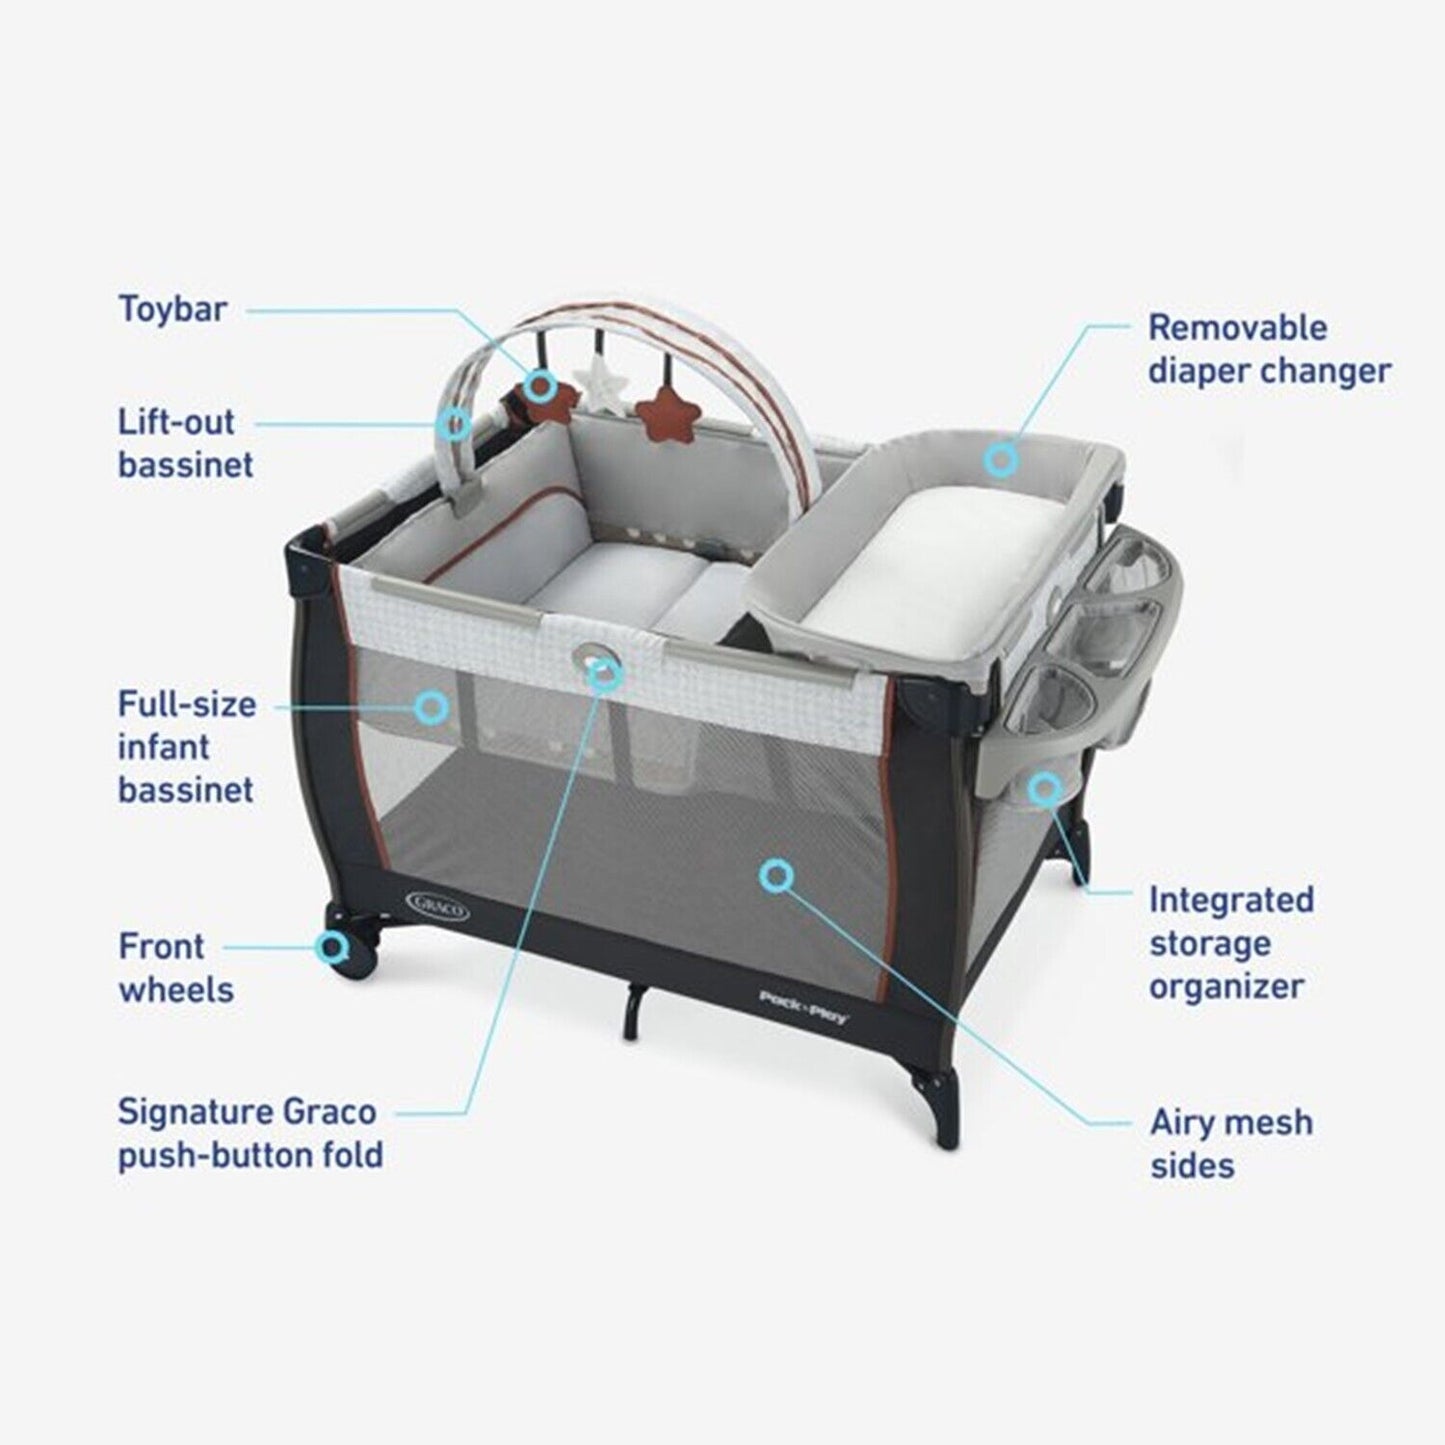 Baby Stroller with Car Seat Evenflo Omni Plus Travel System Playard  Combo Set